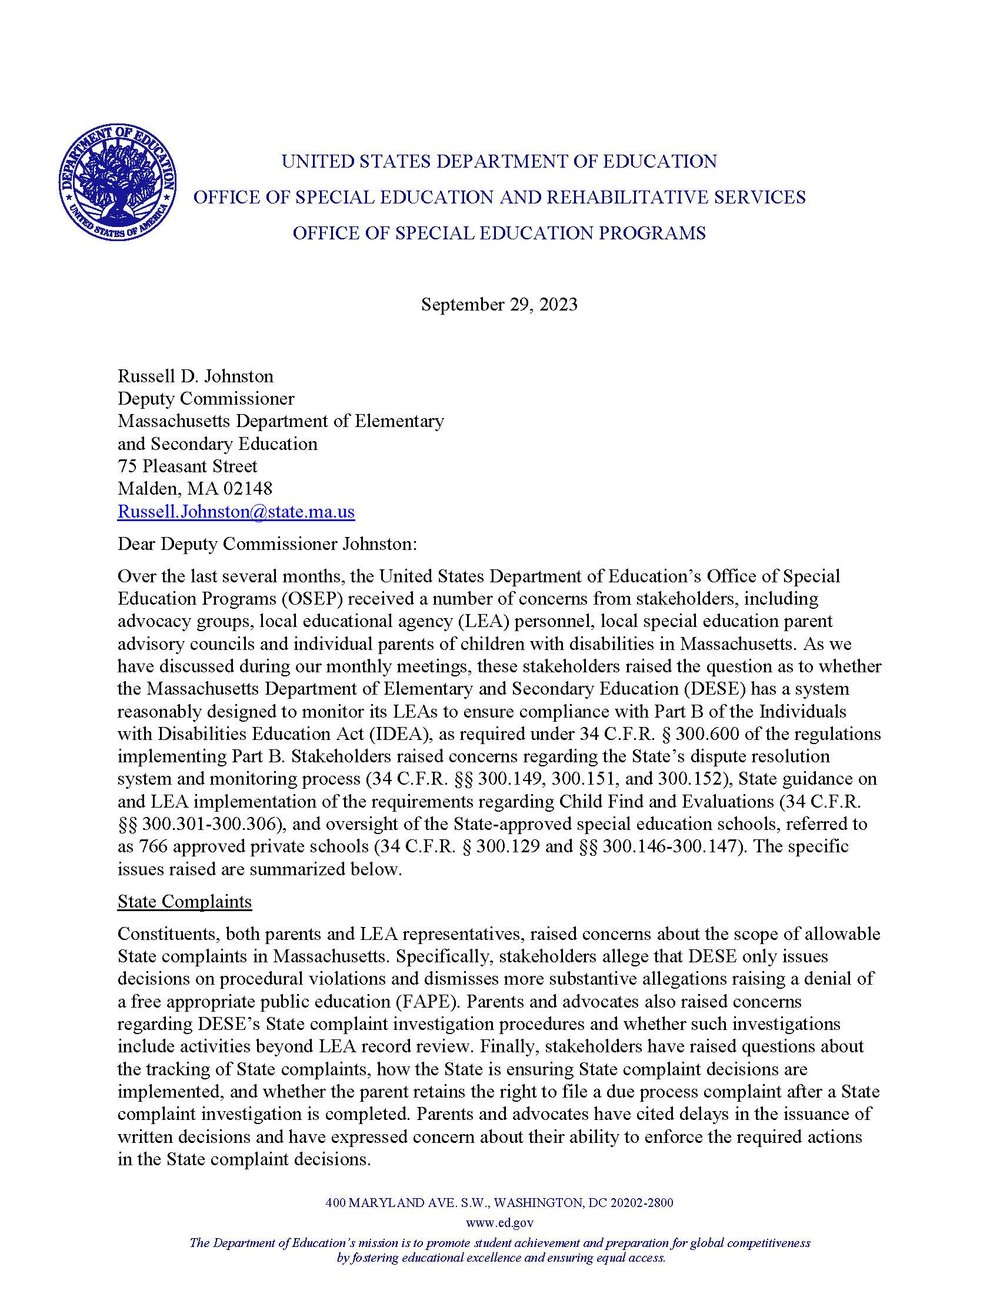 SPEDWatch Announcemet with OSEP Letter 09-29-2023_Page_1.jpg